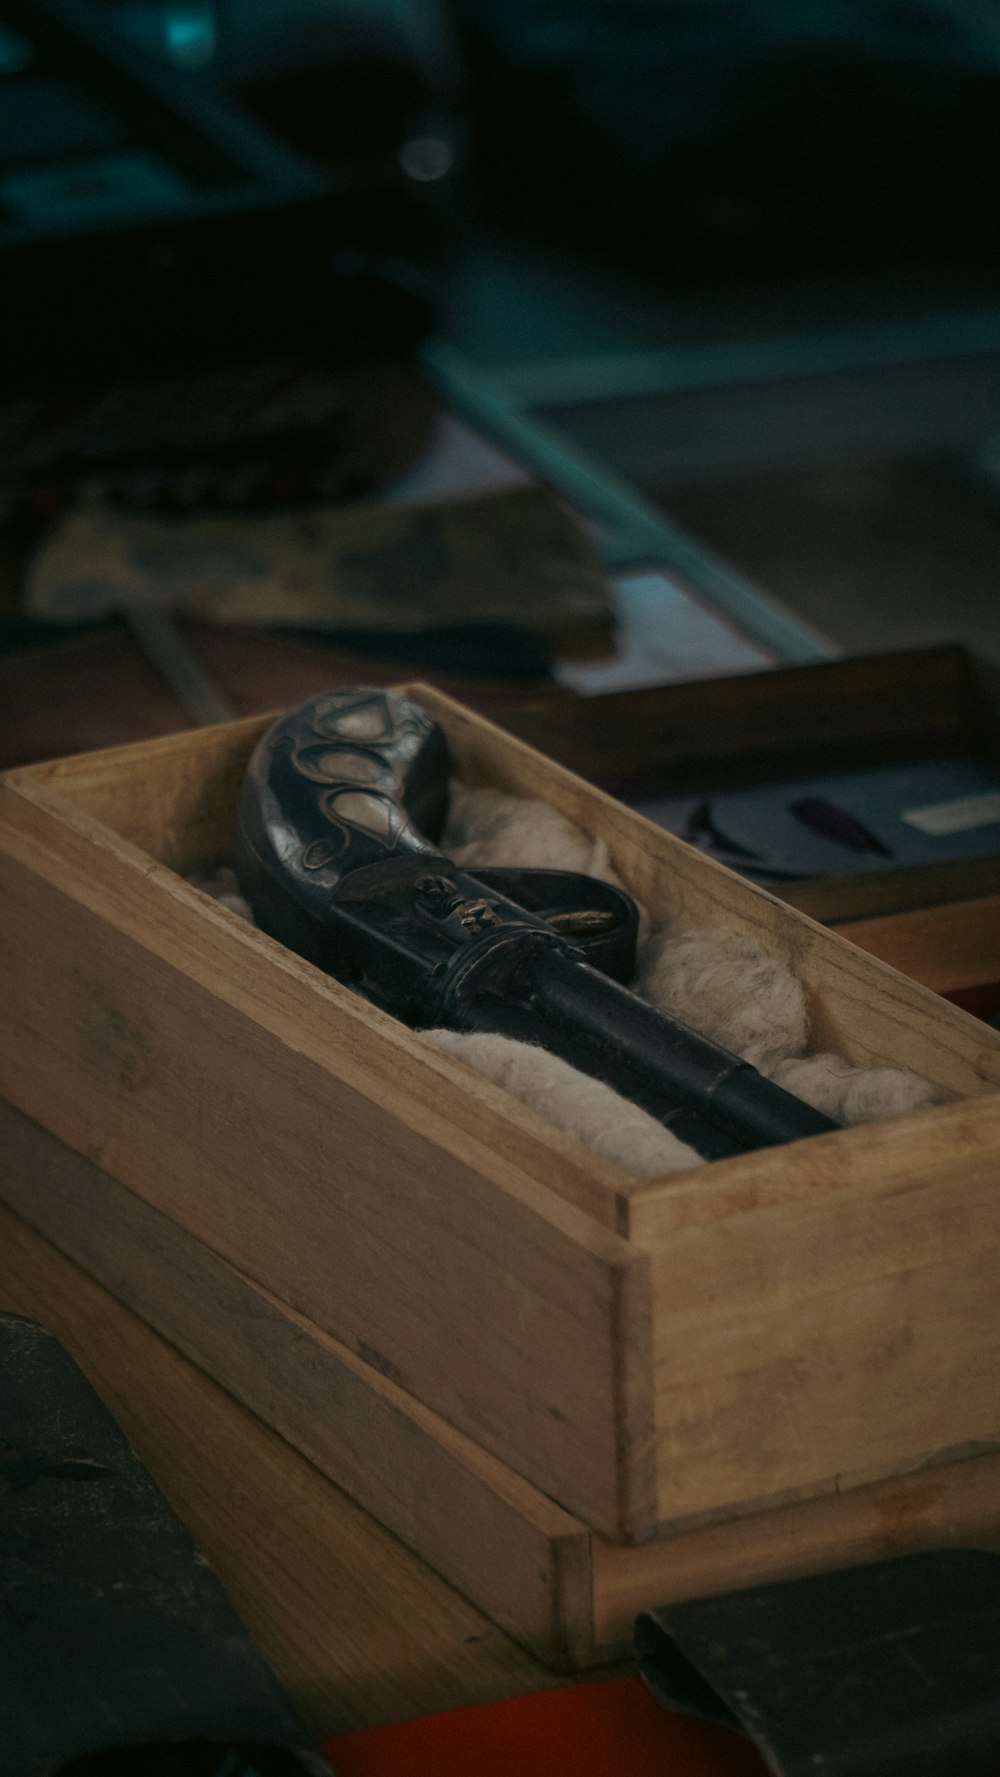 a pair of shoes in a wooden box